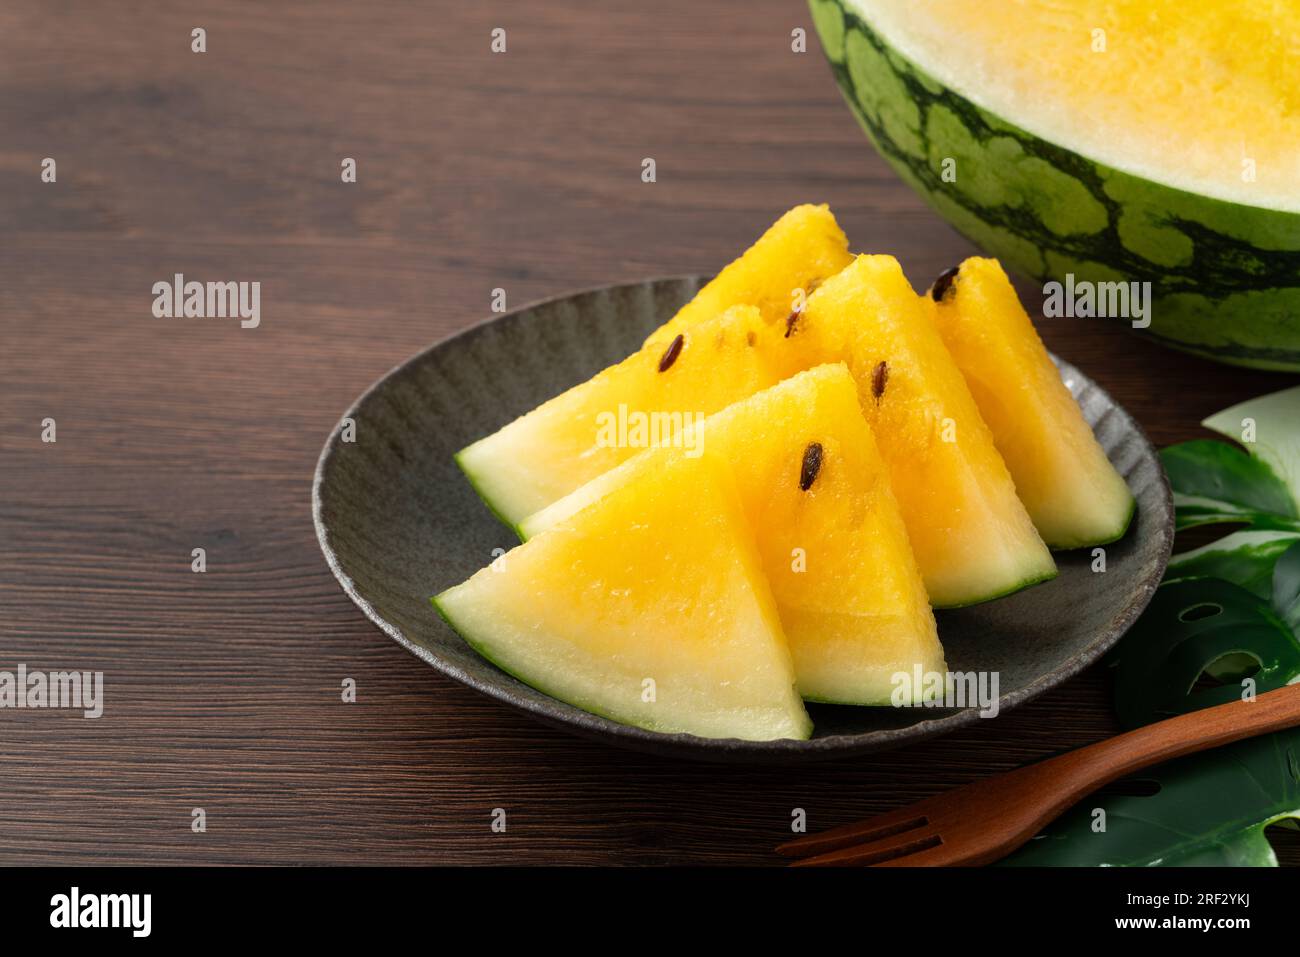 Sliced yellow golden watermelon in a plate on wooden table background ready for eating. Stock Photo